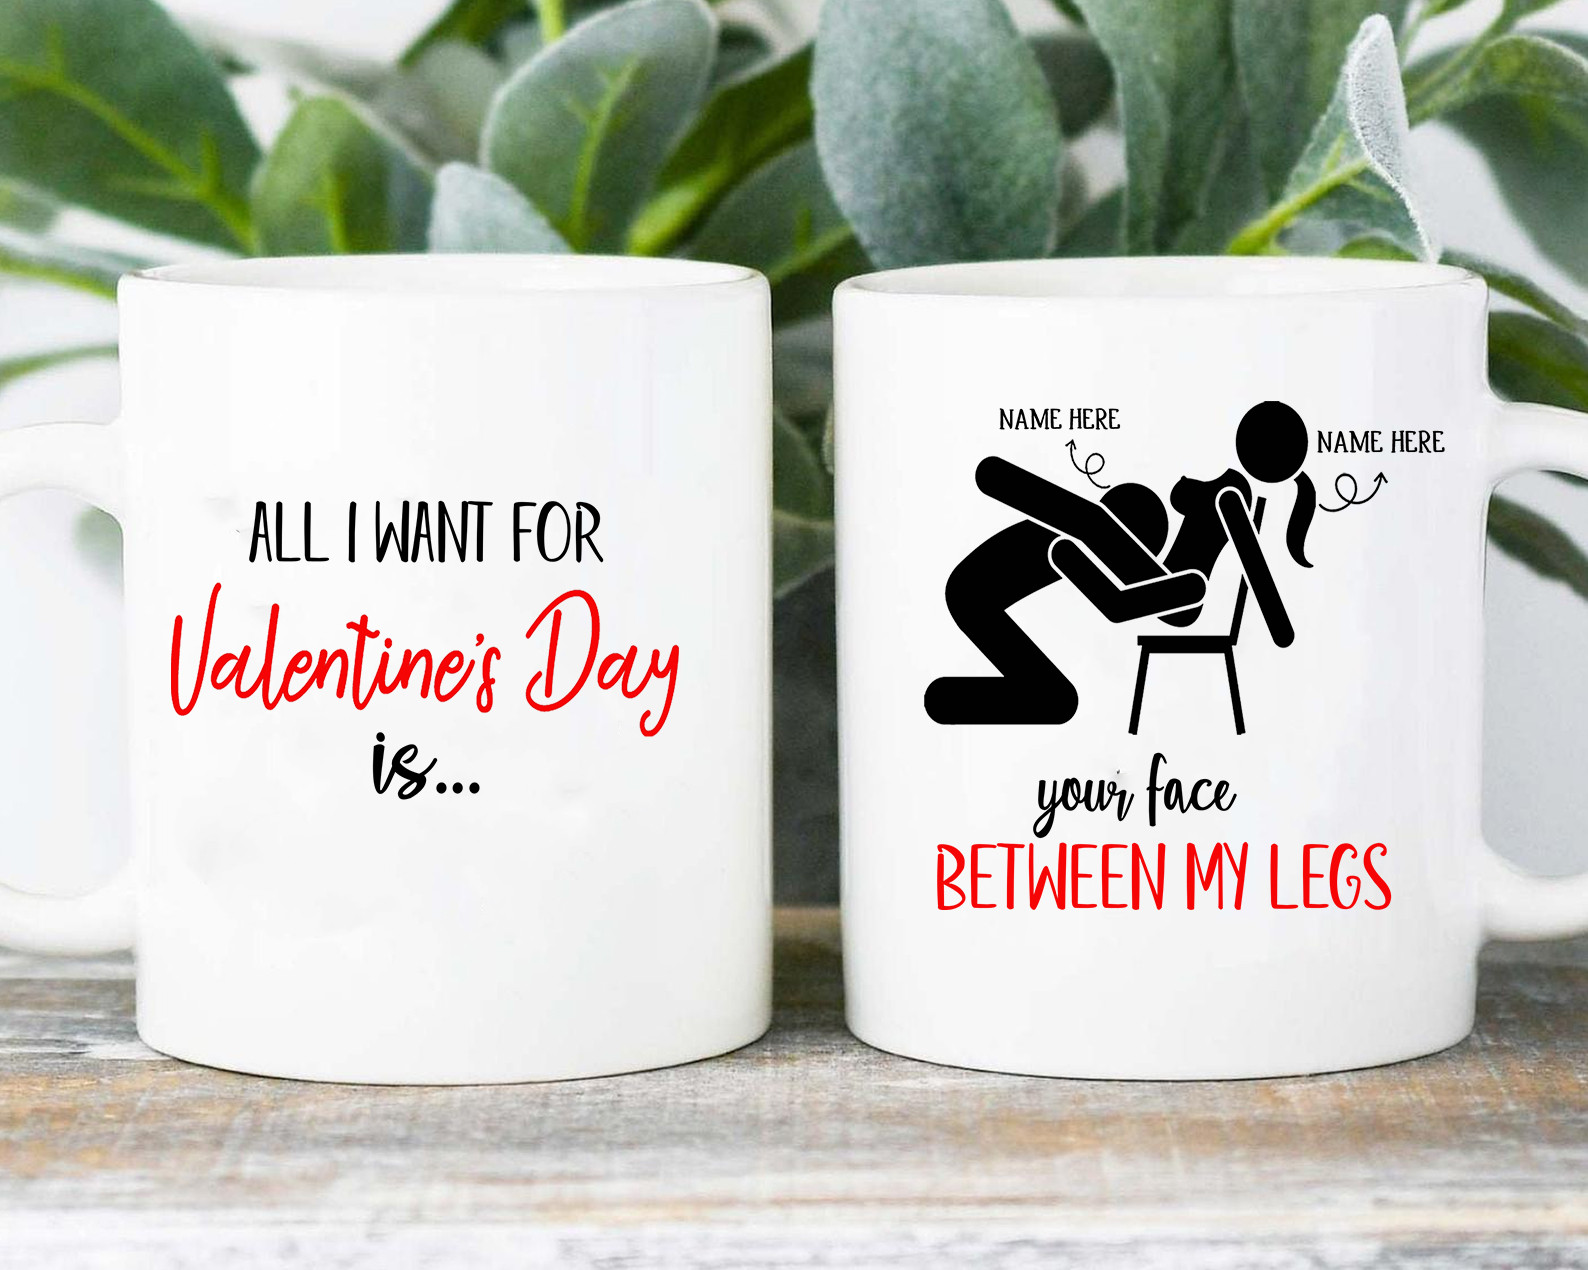 Personalized Funny All I Want For Valentine's Day Is Your Face Between My Legs